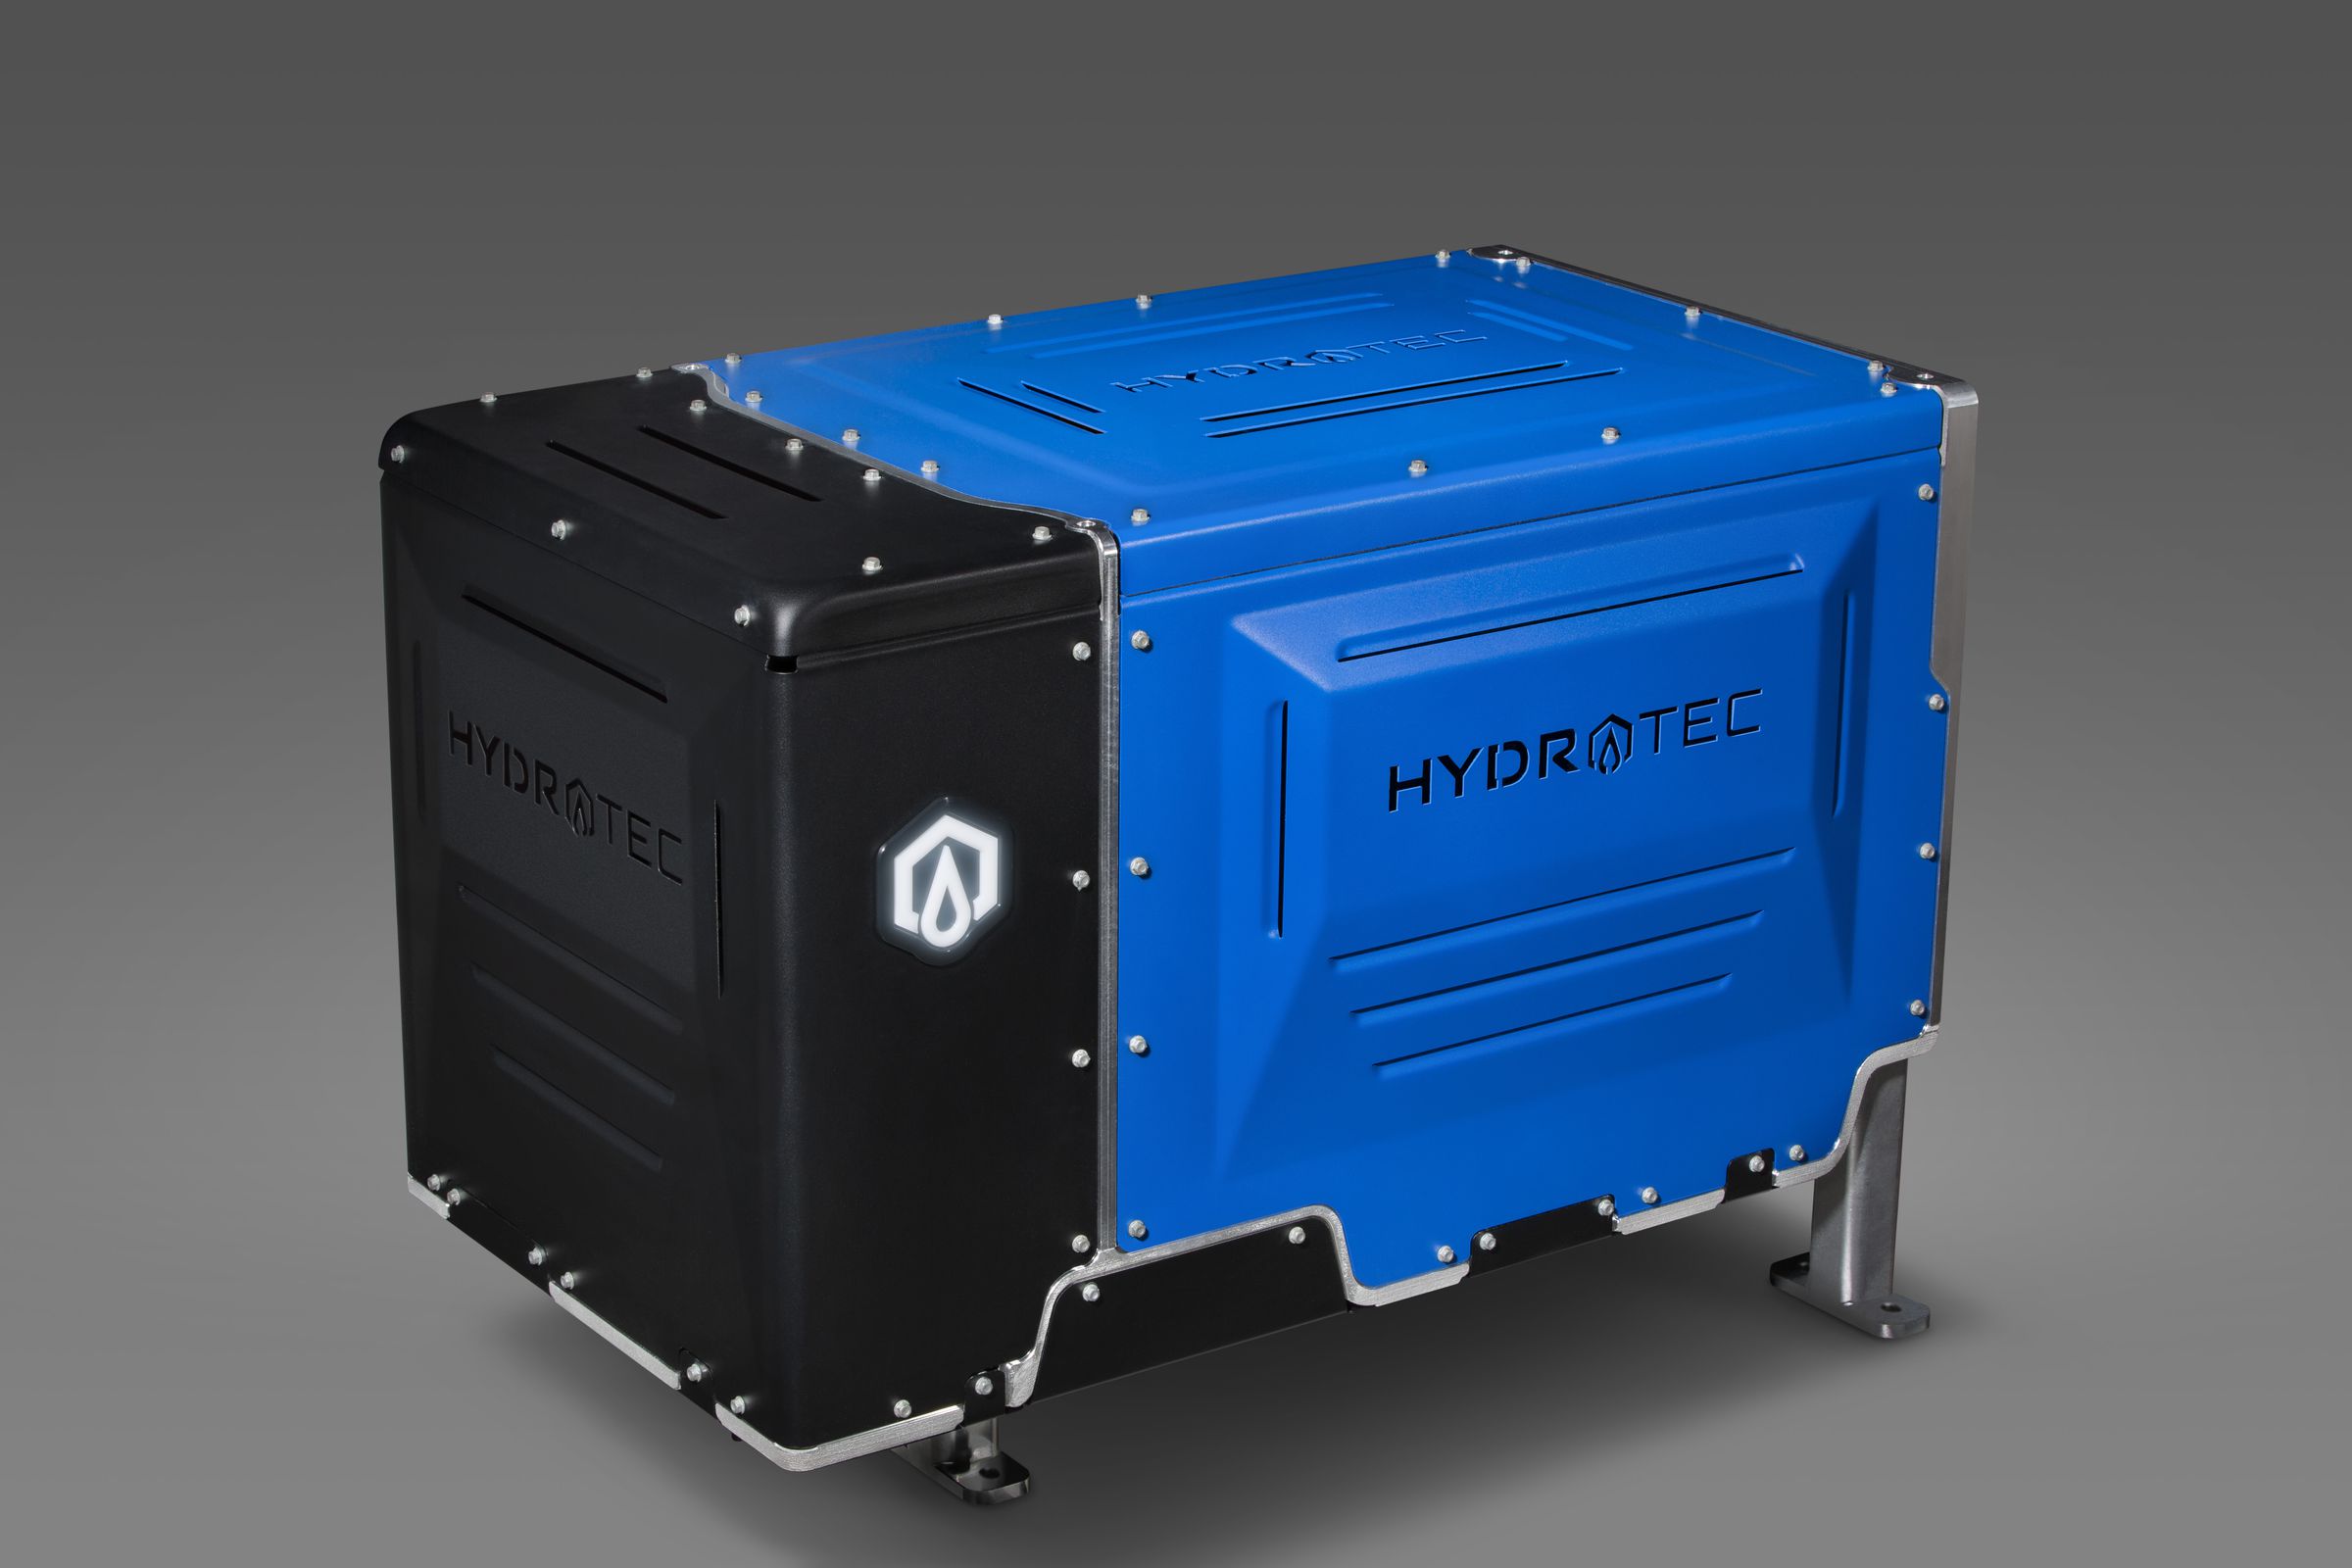 GM’s Hydrotec power cube